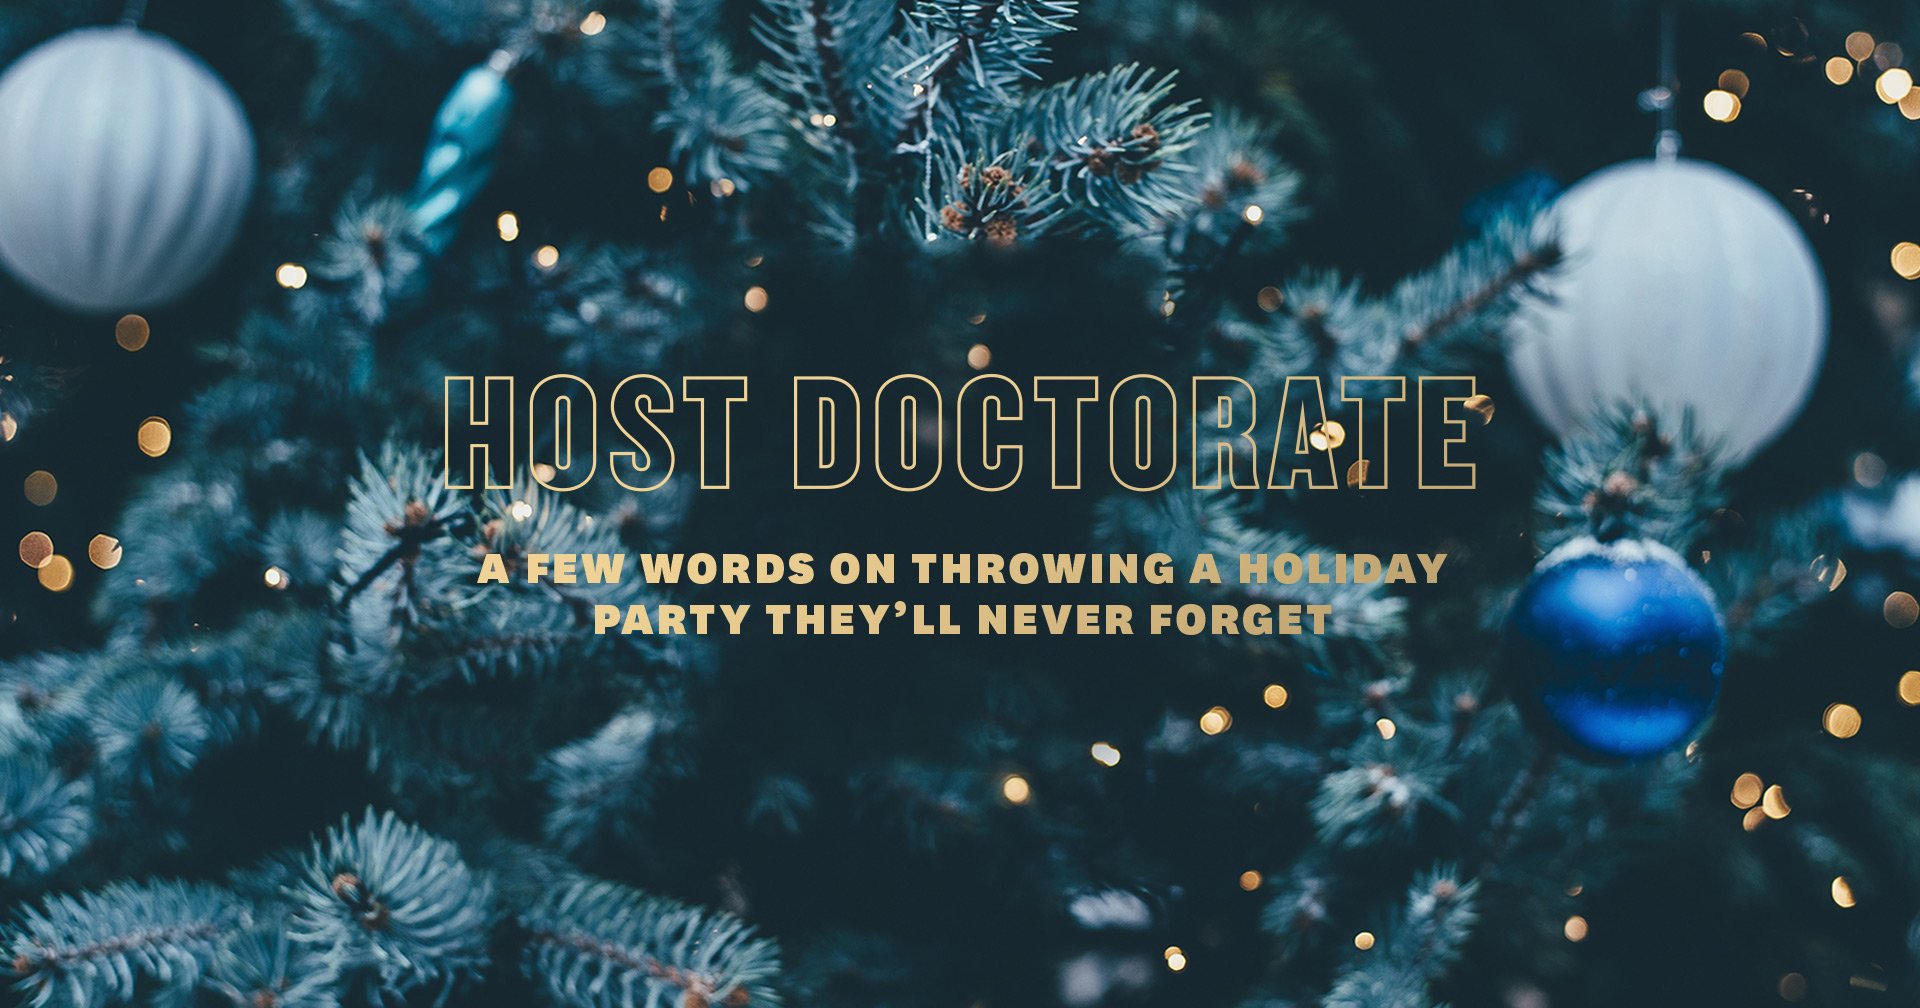 A Few Words on Throwing a Holiday Party They’ll Never Forget